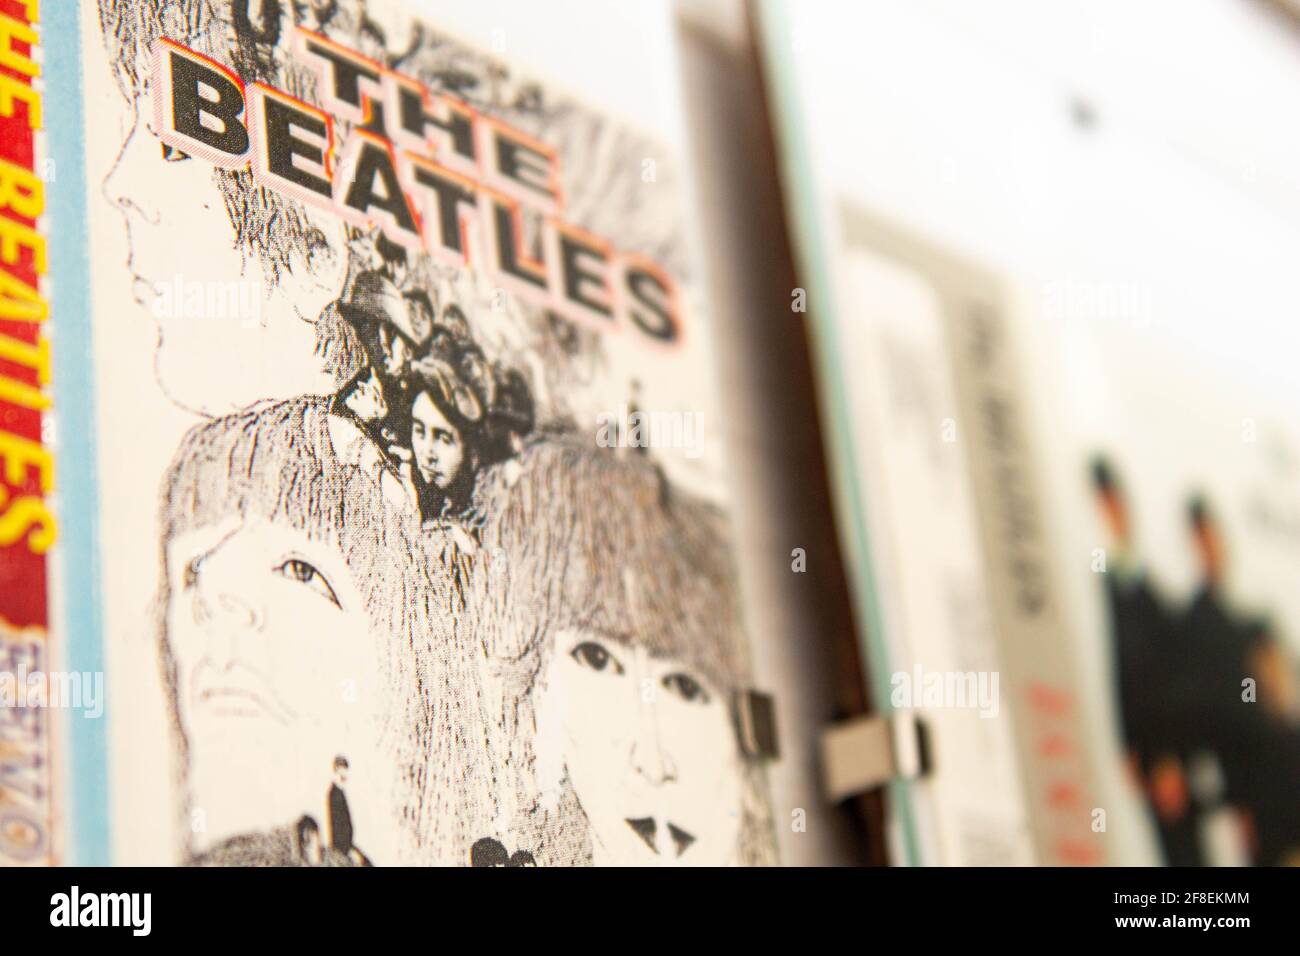 The Beatles collection. The Beatles album cover exhibition. Stock Photo